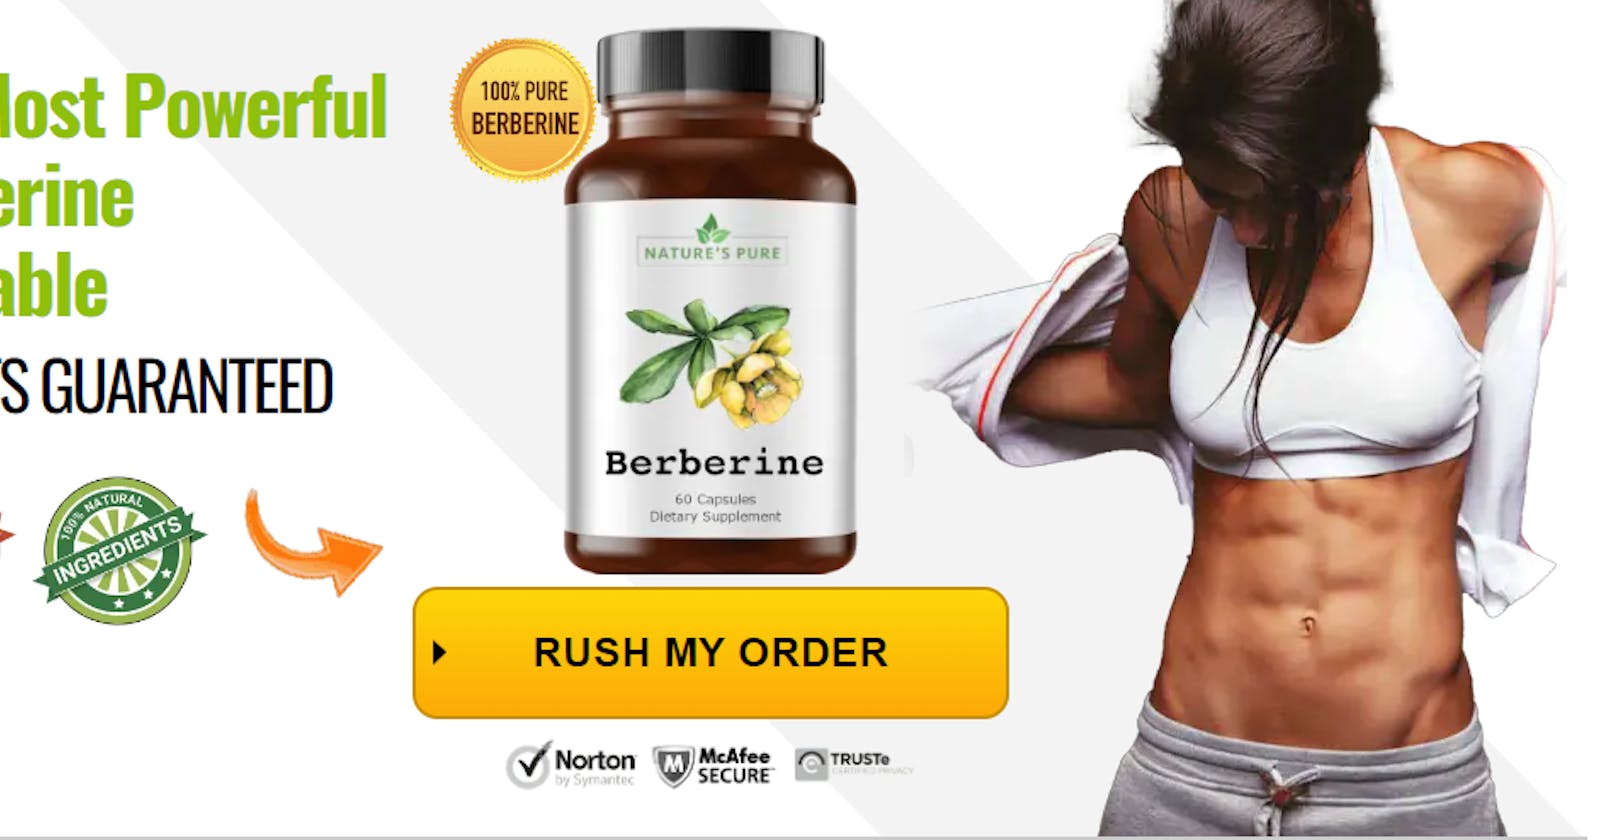 Nature's Pure Berberine: Is This Fat-Burning Supplement the Real Deal?